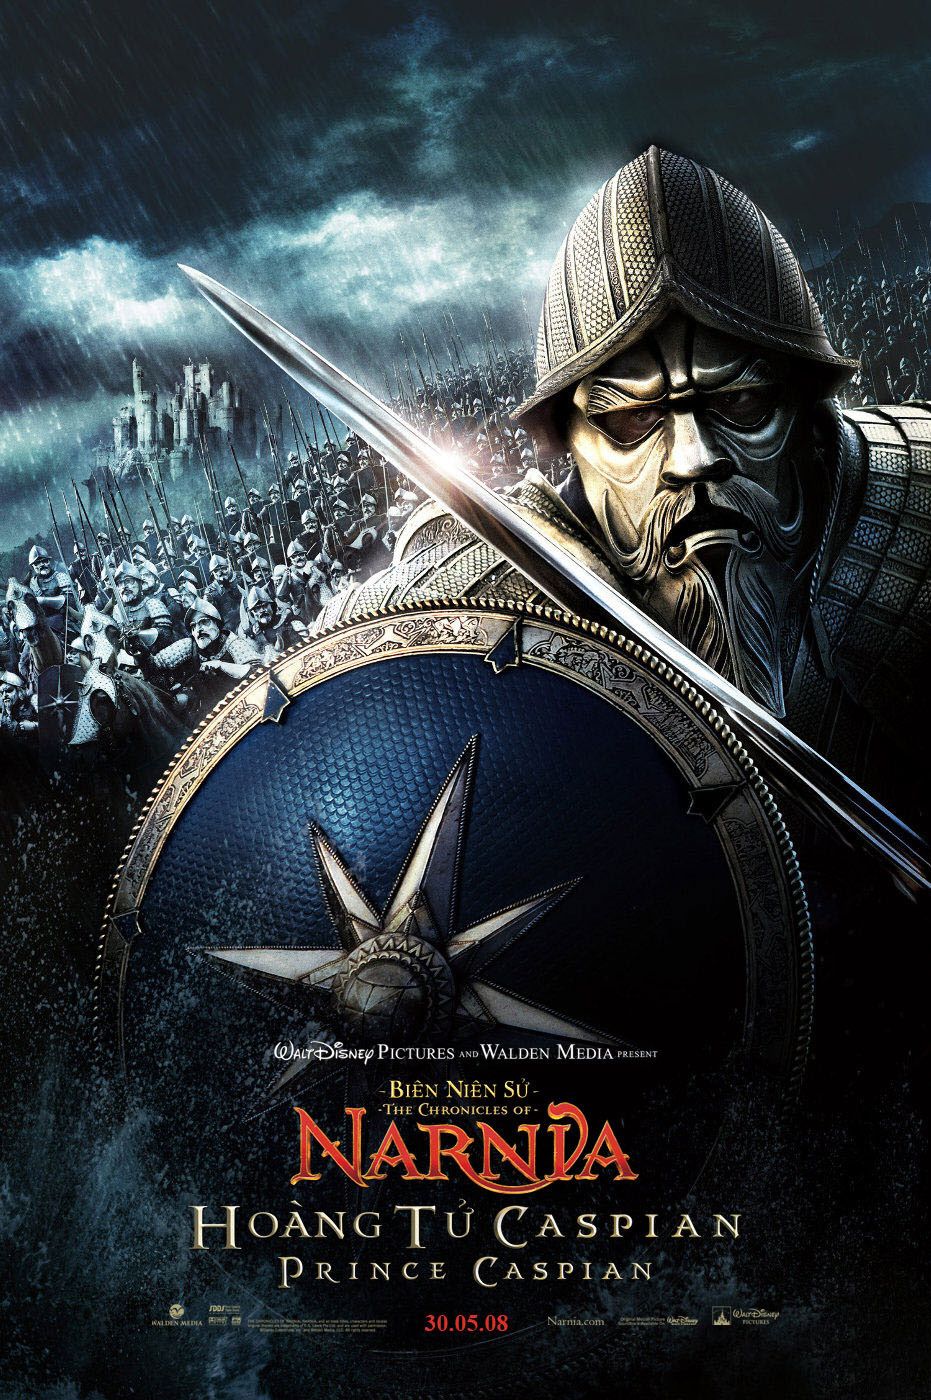 watch narnia 2 online free without downloading